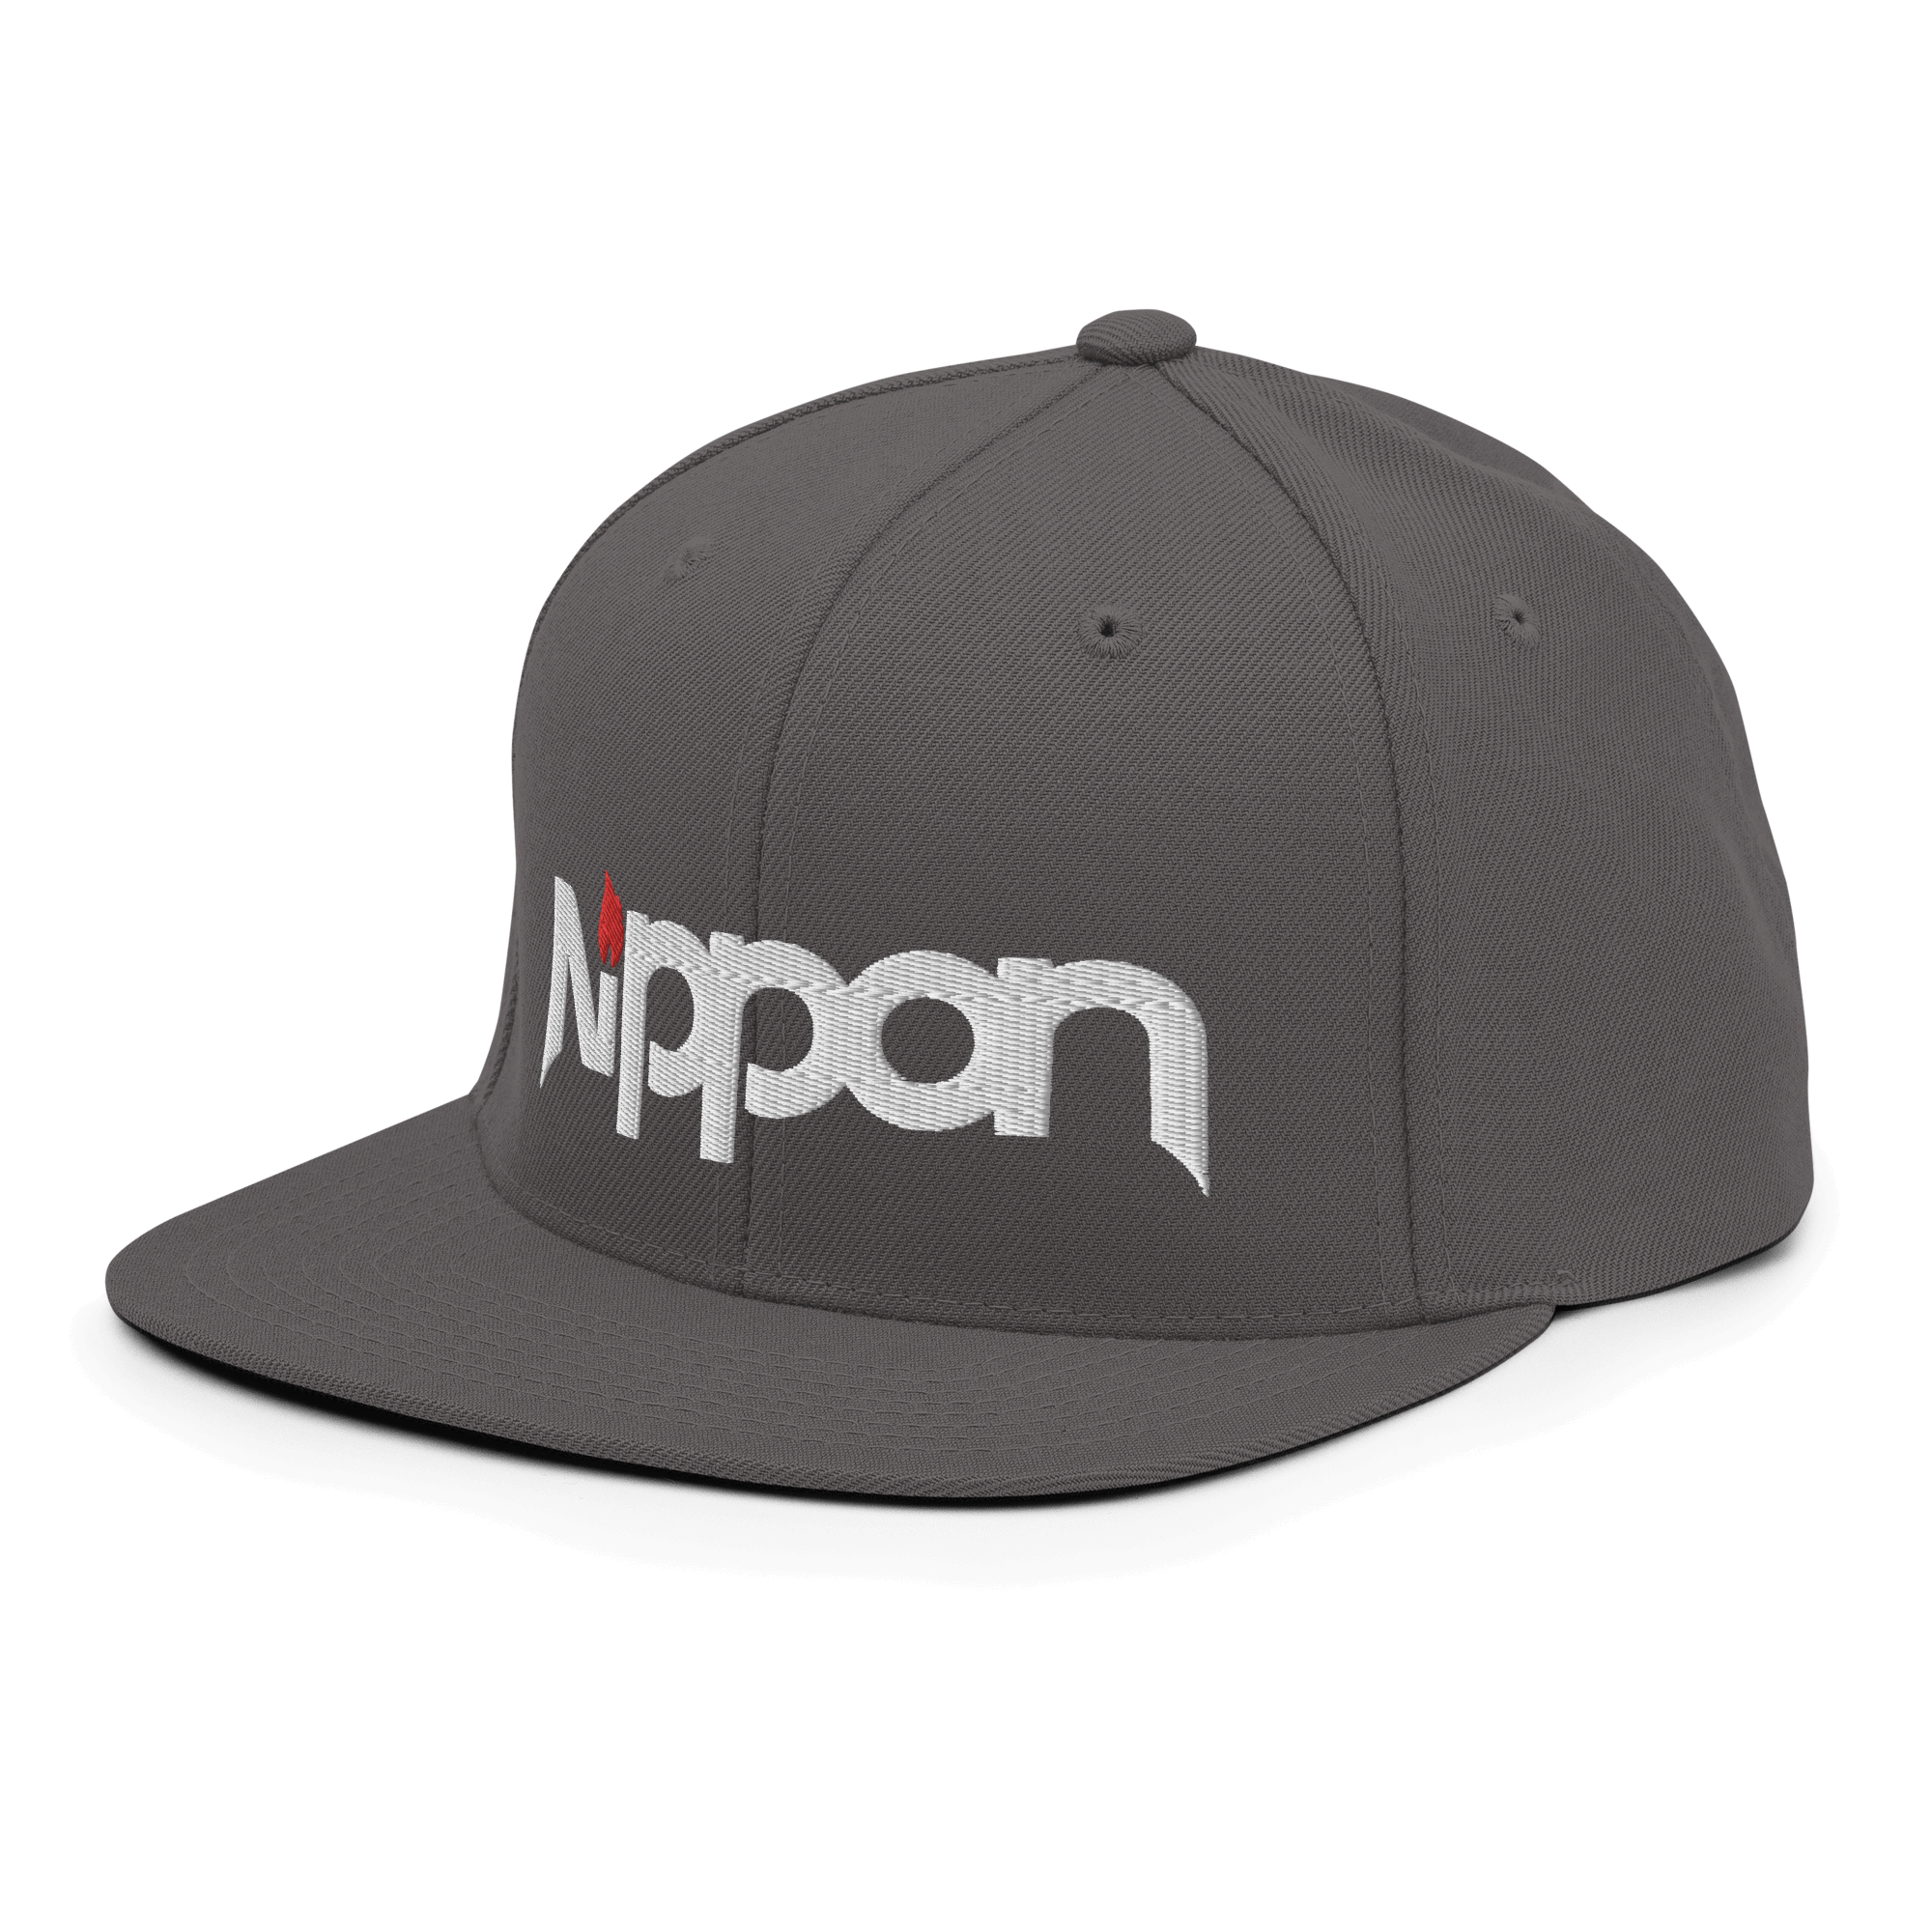 Nippon Snapback CapUnleash your style with the Nippon Snapback Cap – a classic fit, flat brim, and full buckram structure that captures the essence of timeless cool. The adjustable snap closure ensures a comfortable, one-size-fits-most fit. Crafted exclus